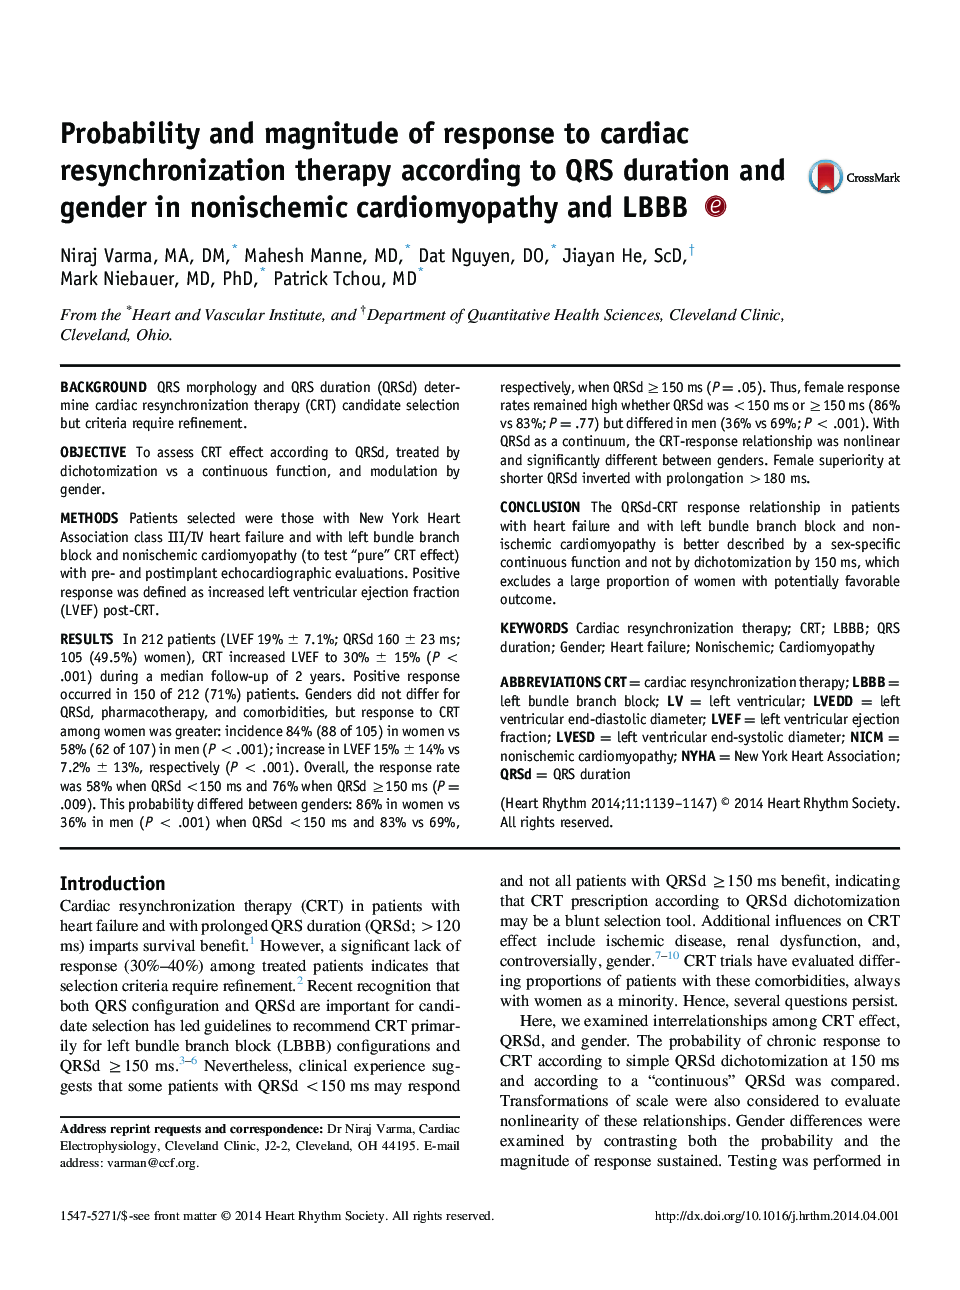 Probability and magnitude of response to cardiac resynchronization therapy according to QRS duration and gender in nonischemic cardiomyopathy and LBBB